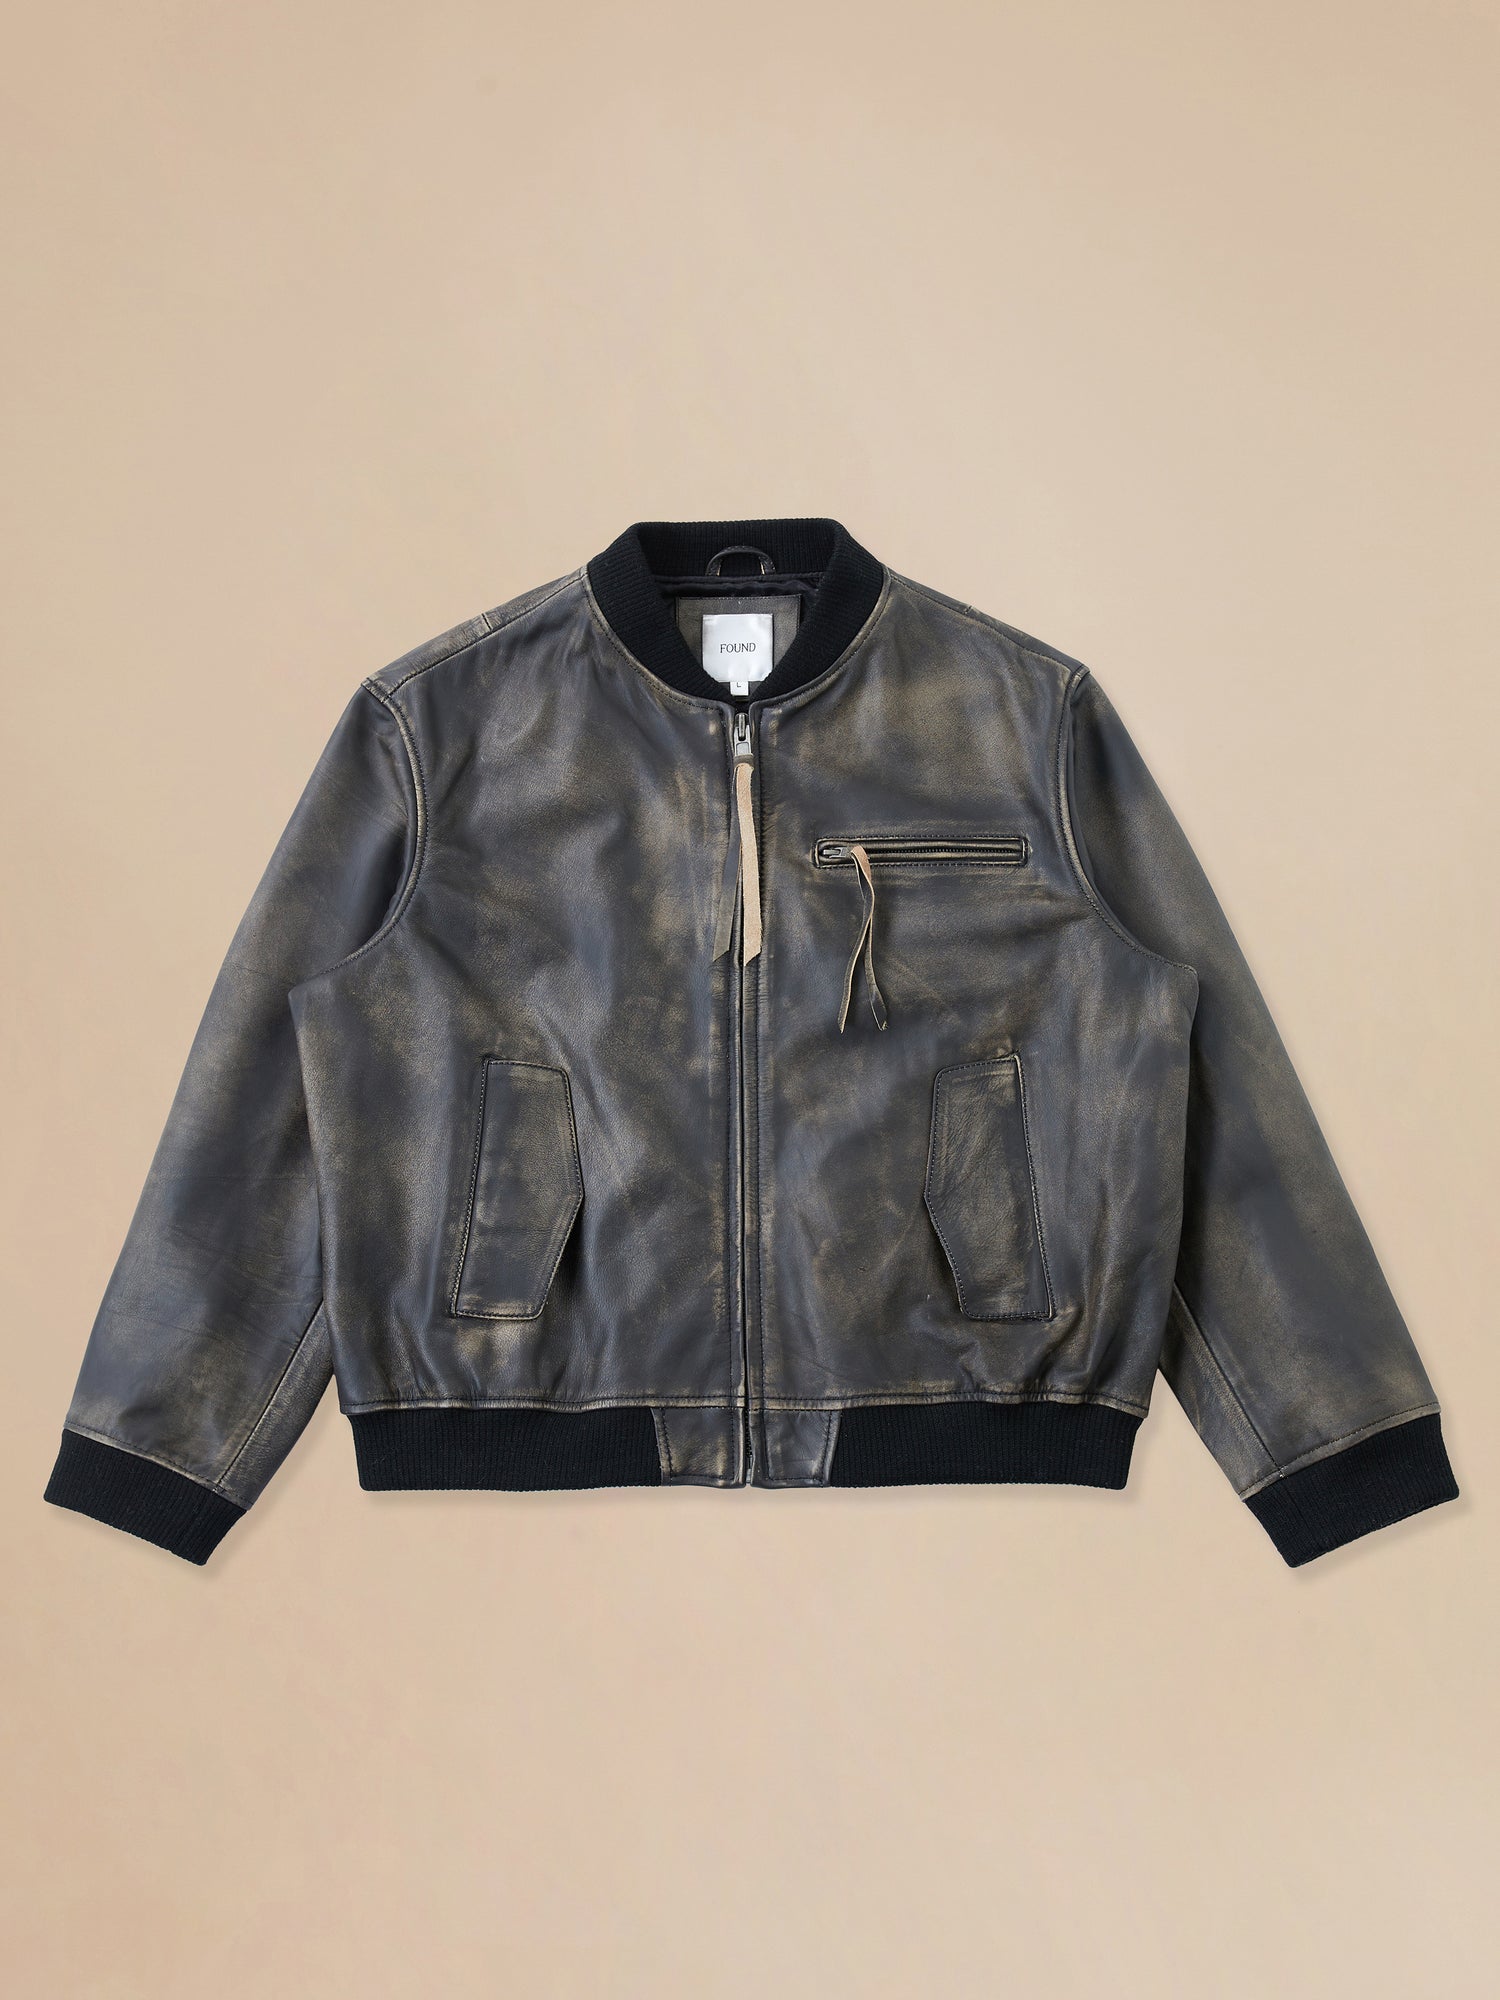 Leather bomber jacket in beige